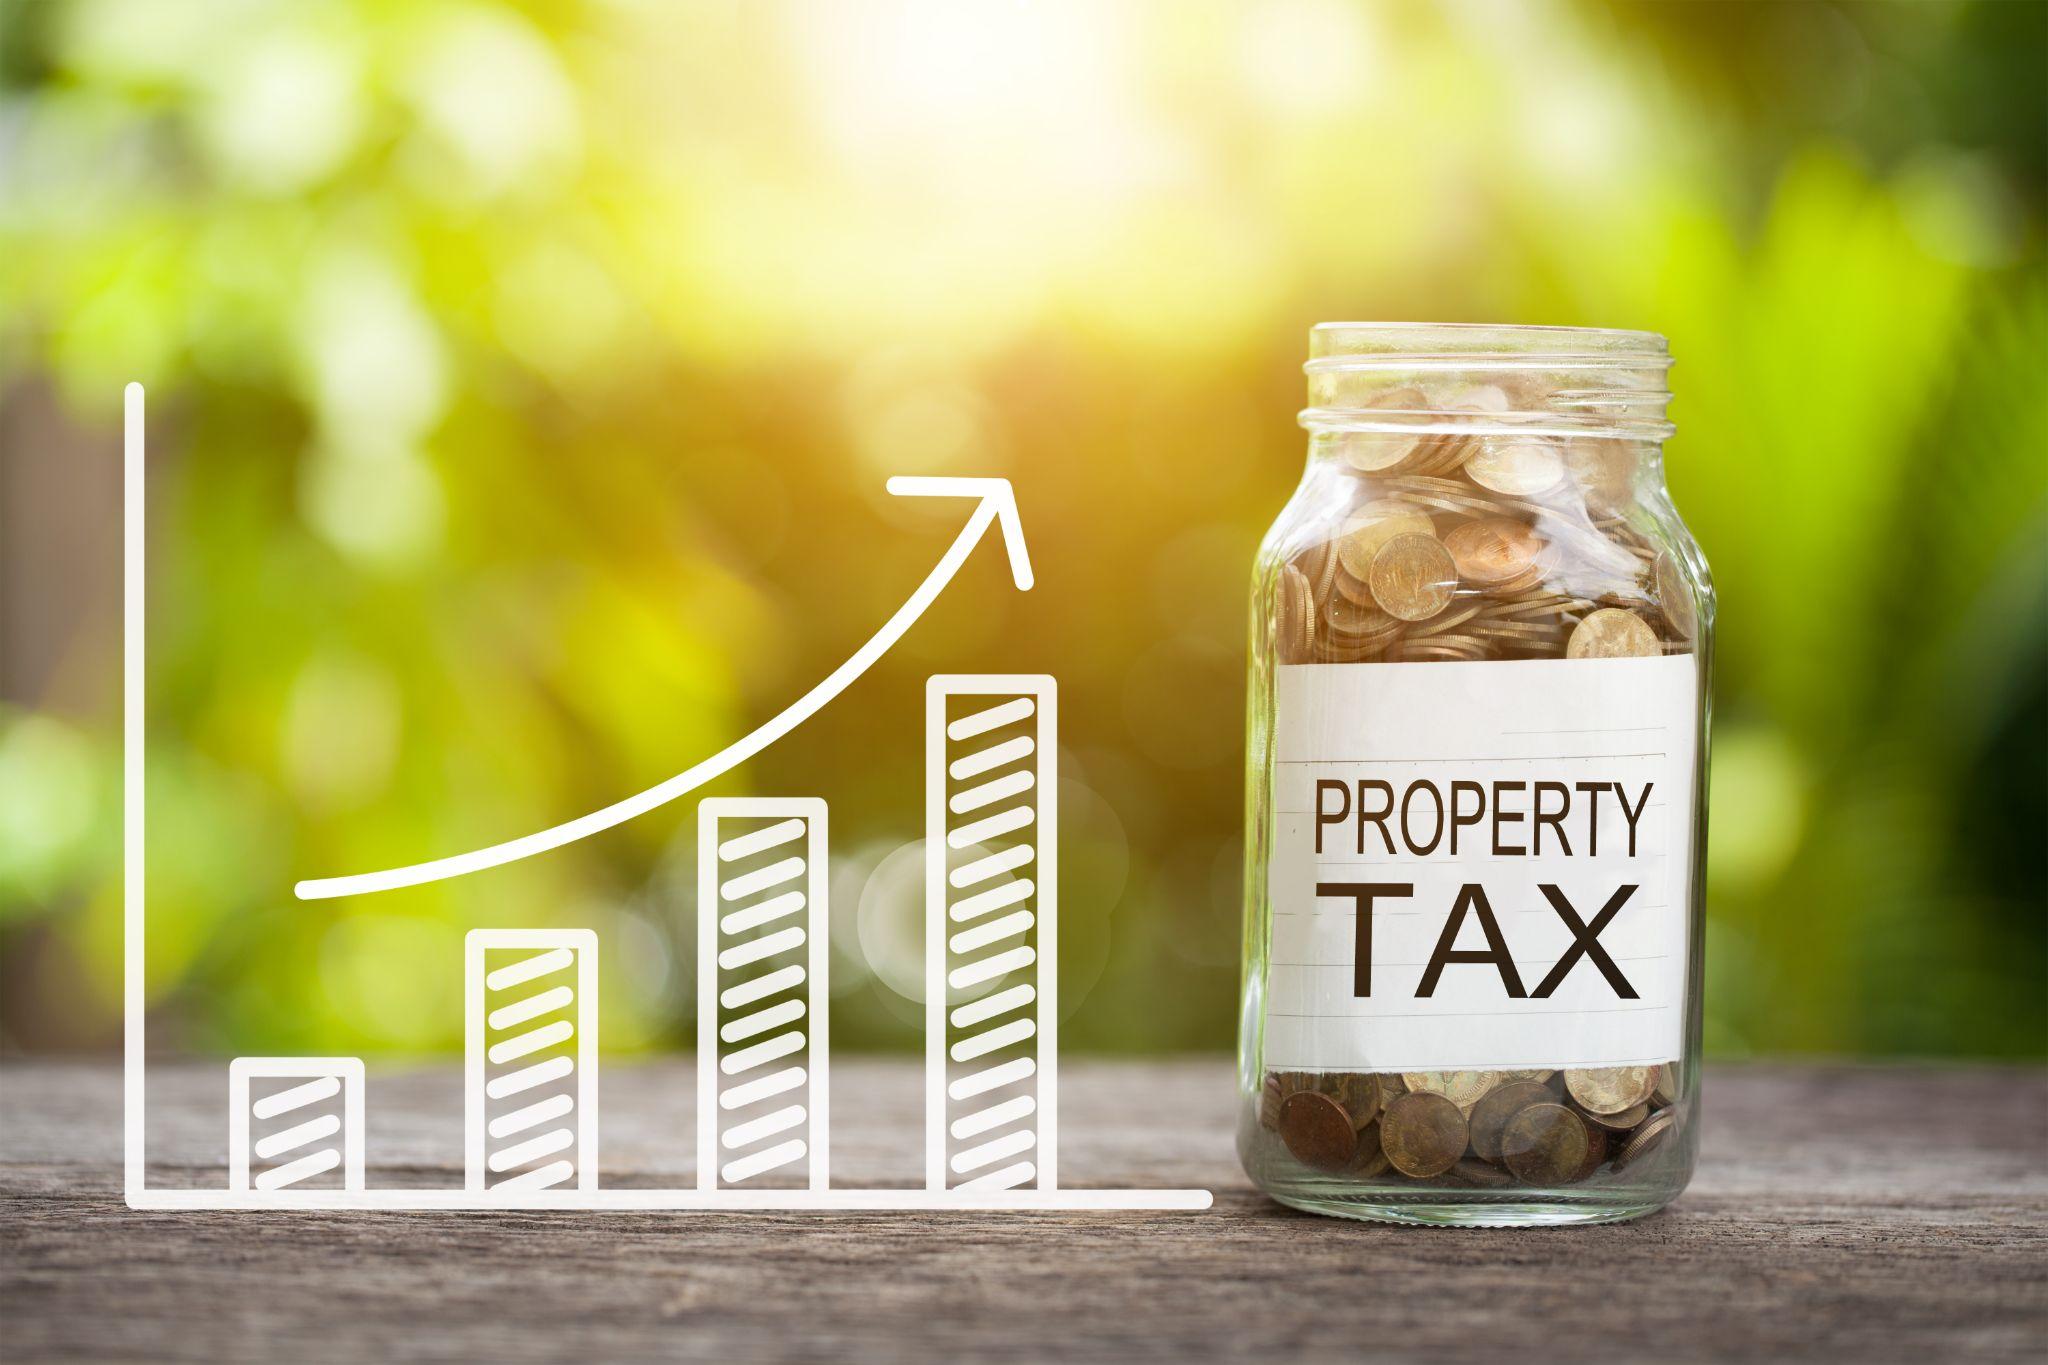 Property tax word with coin in glass jar and graph up